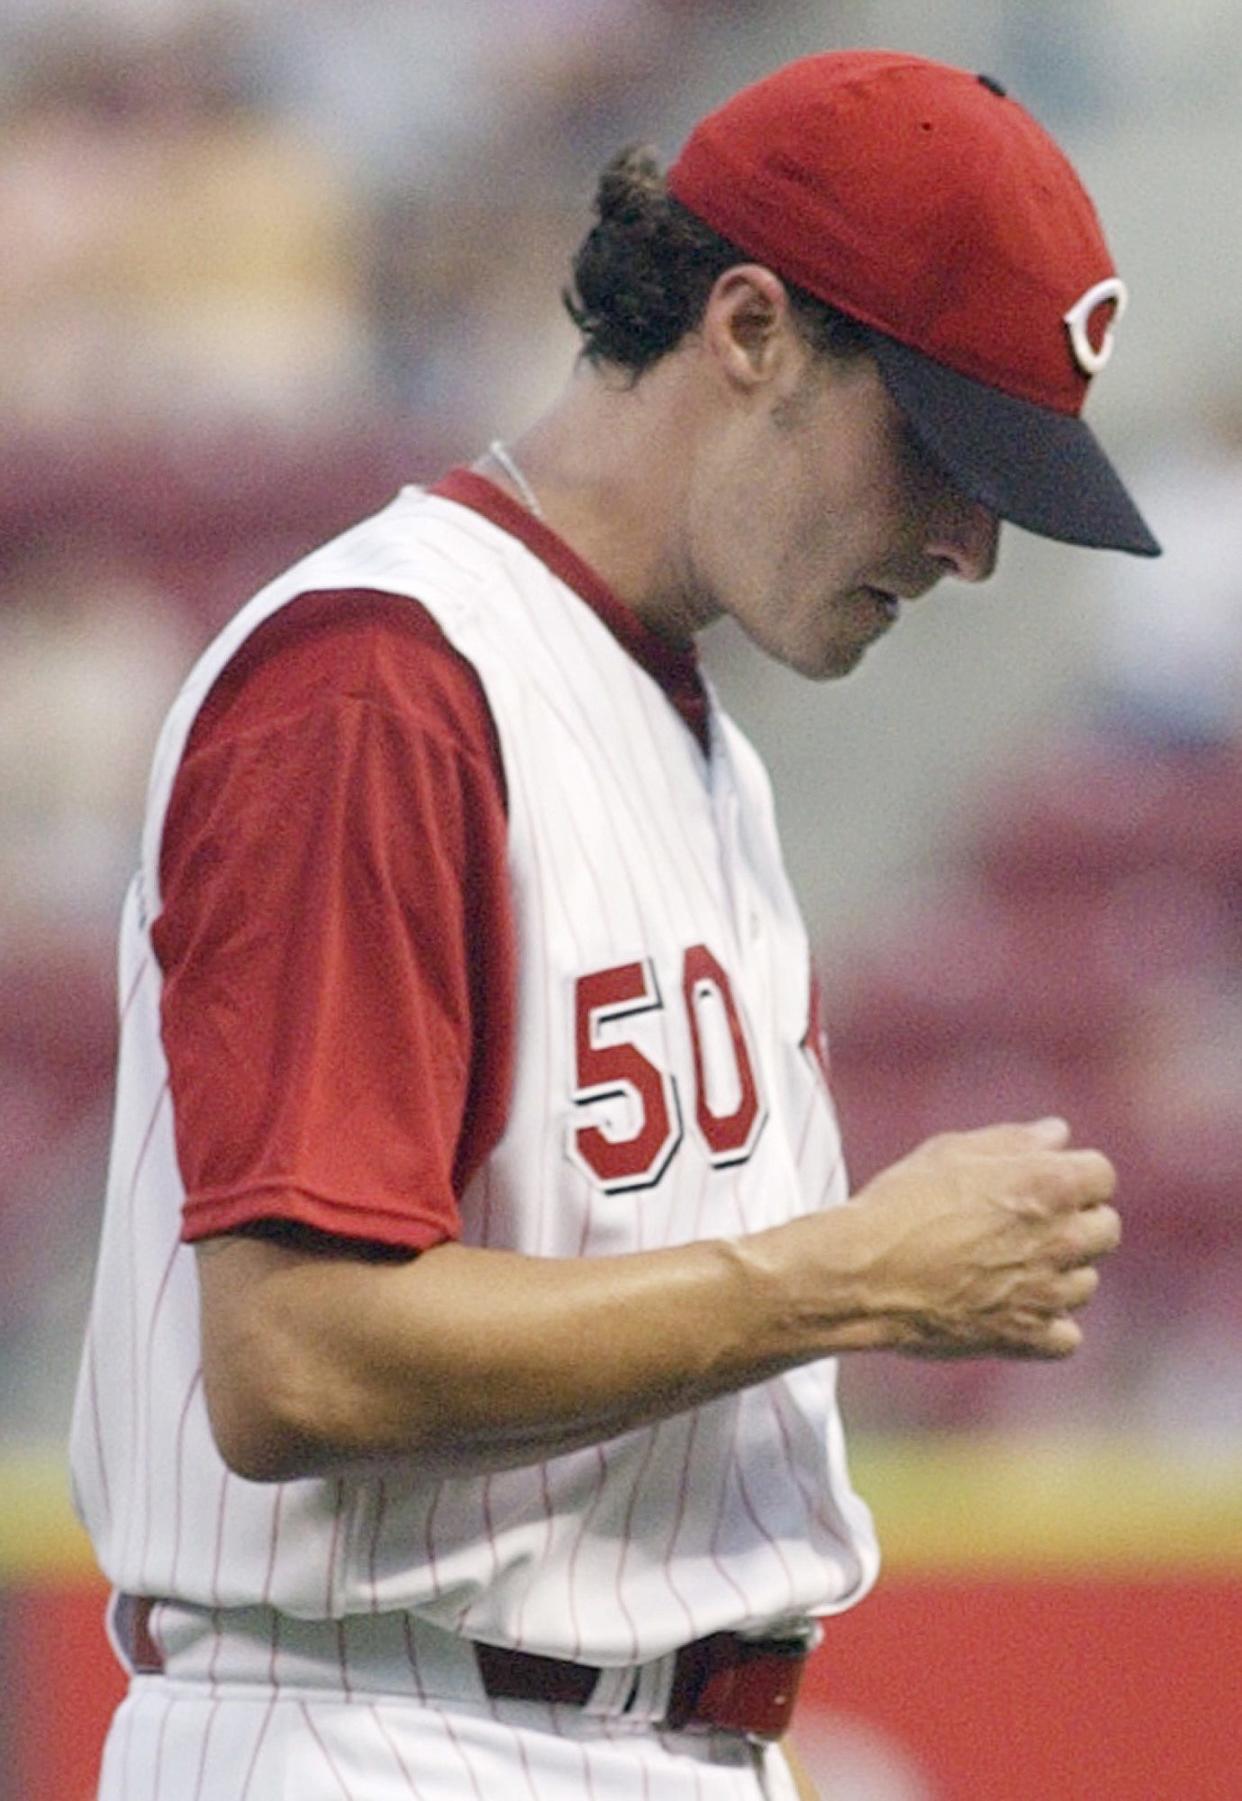 Former Cincinnati Reds pitcher Danny Serafini was arrested Friday as one of two suspects in a 2021 Lake Tahoe homicide.